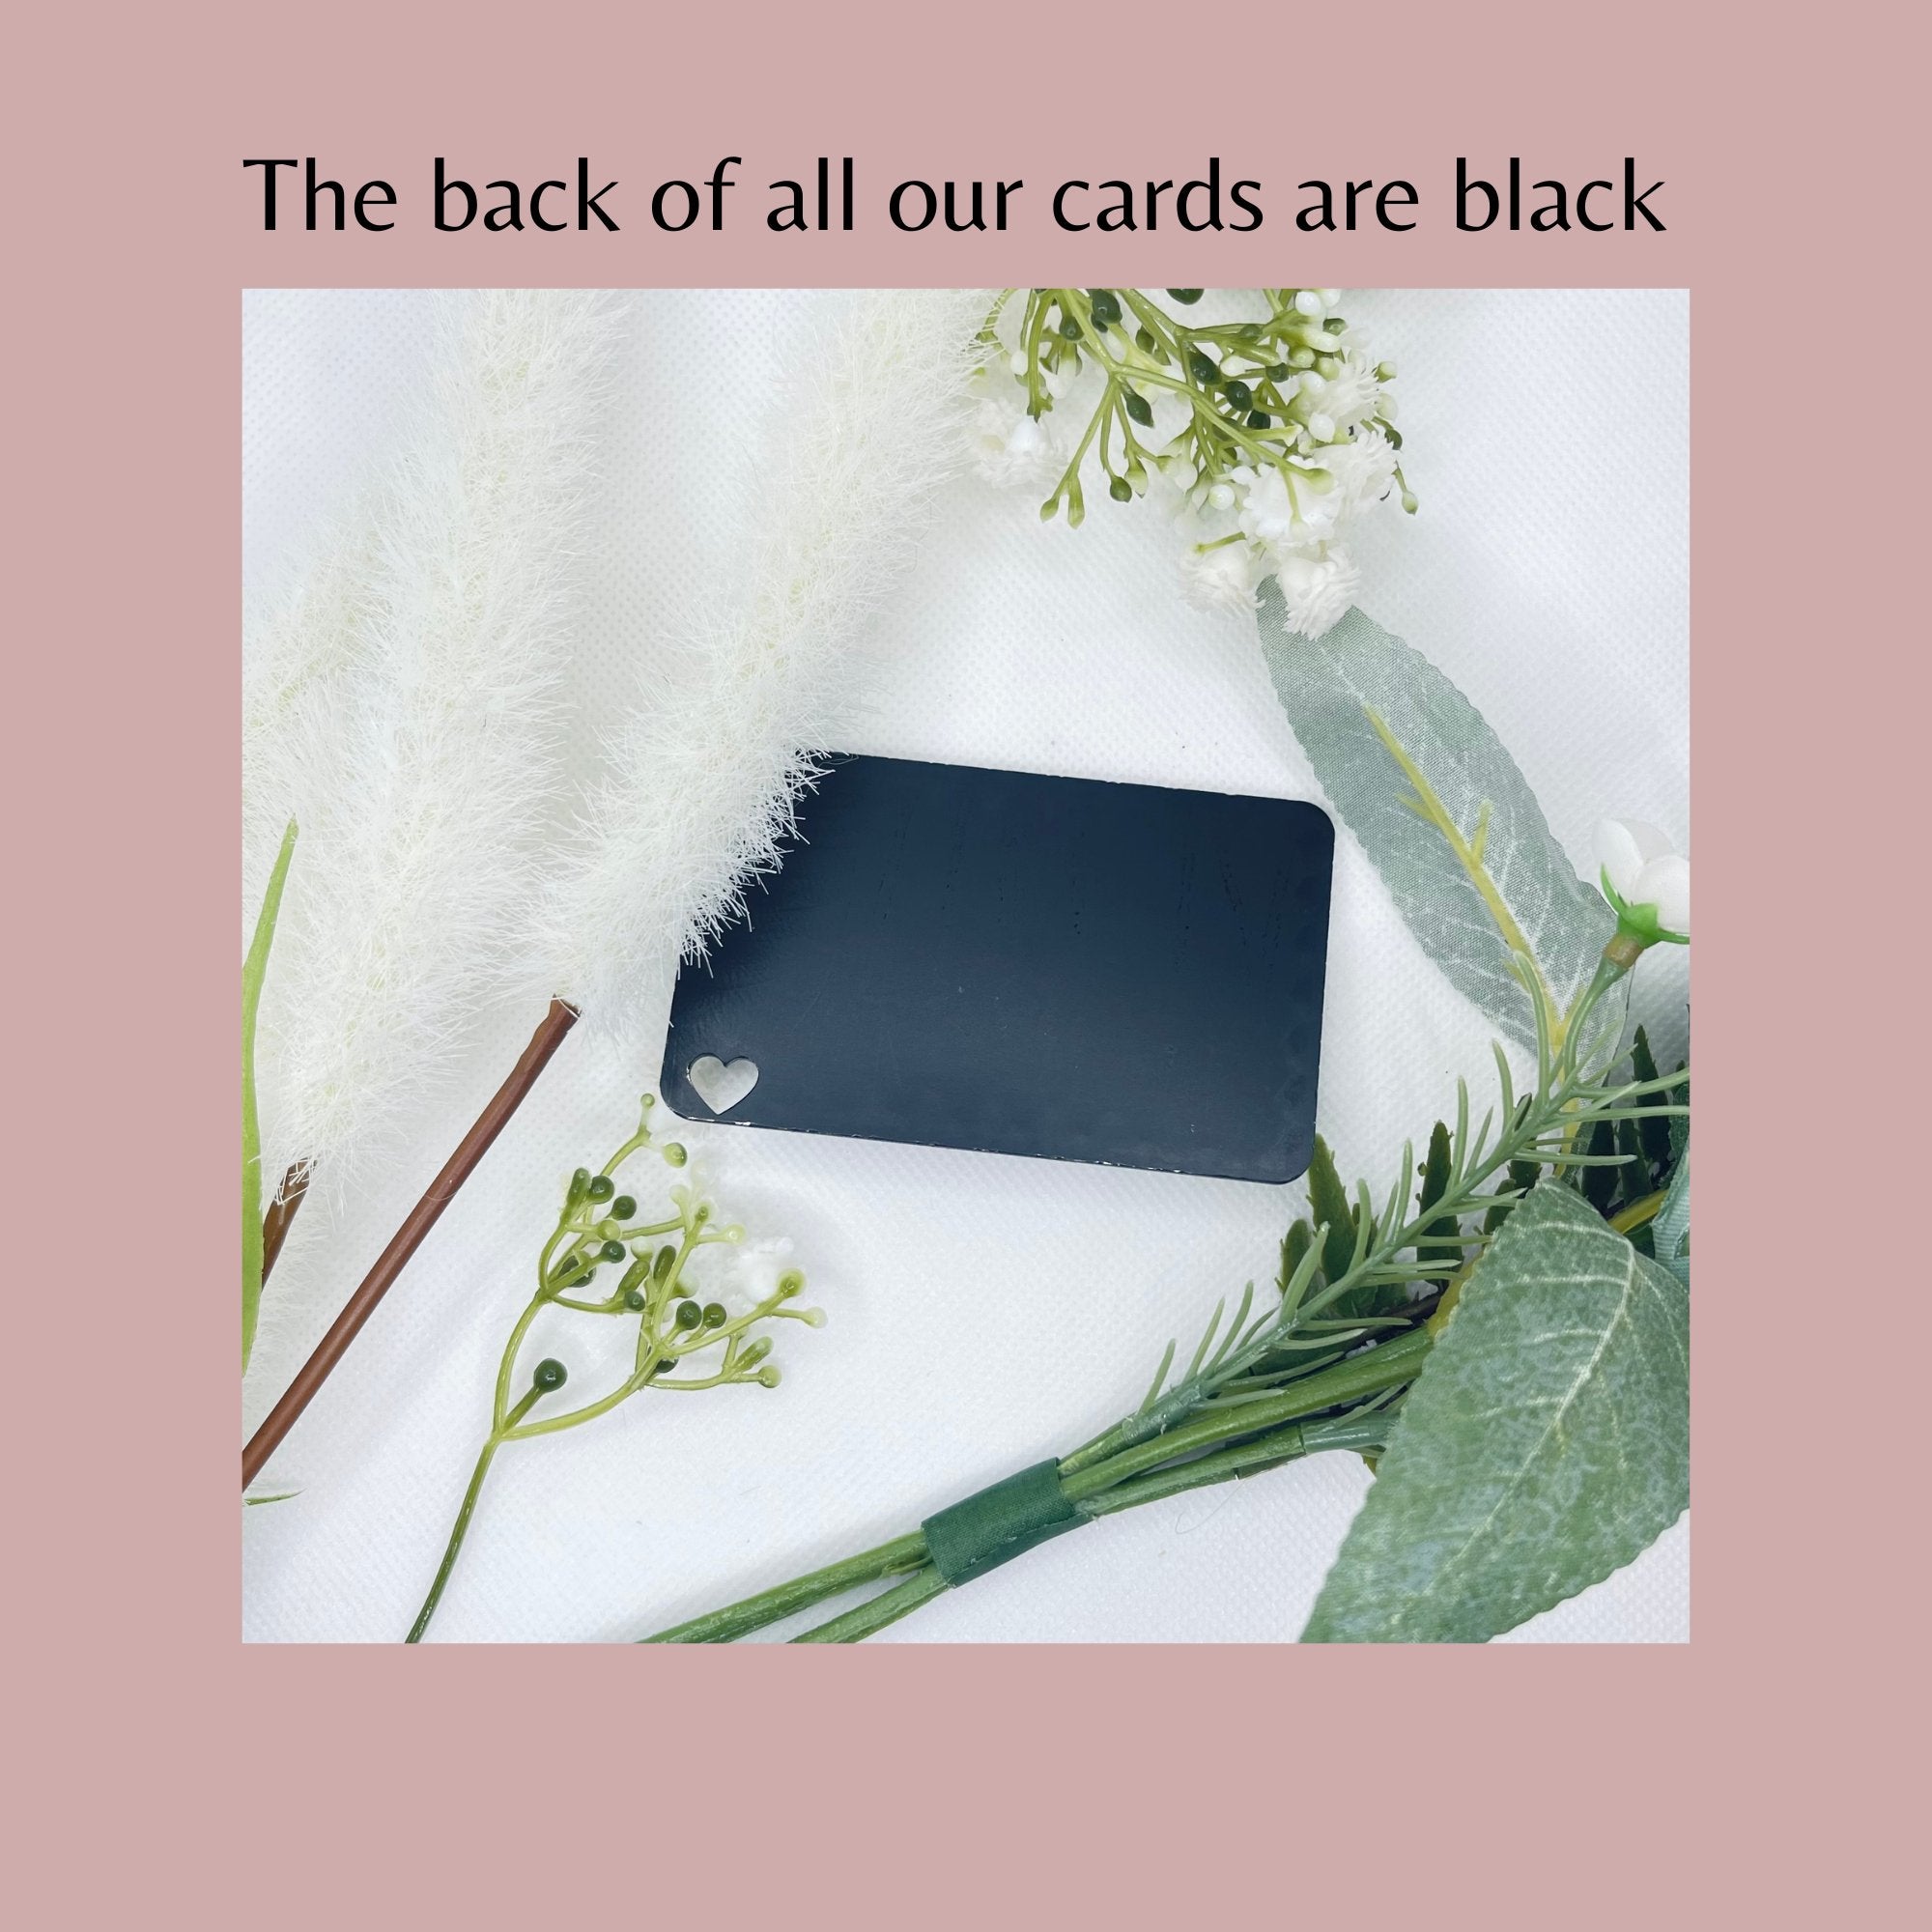 I love you now and always, Size: W55mm X 85mmL X 1.5mmW. The back of the cards are black.